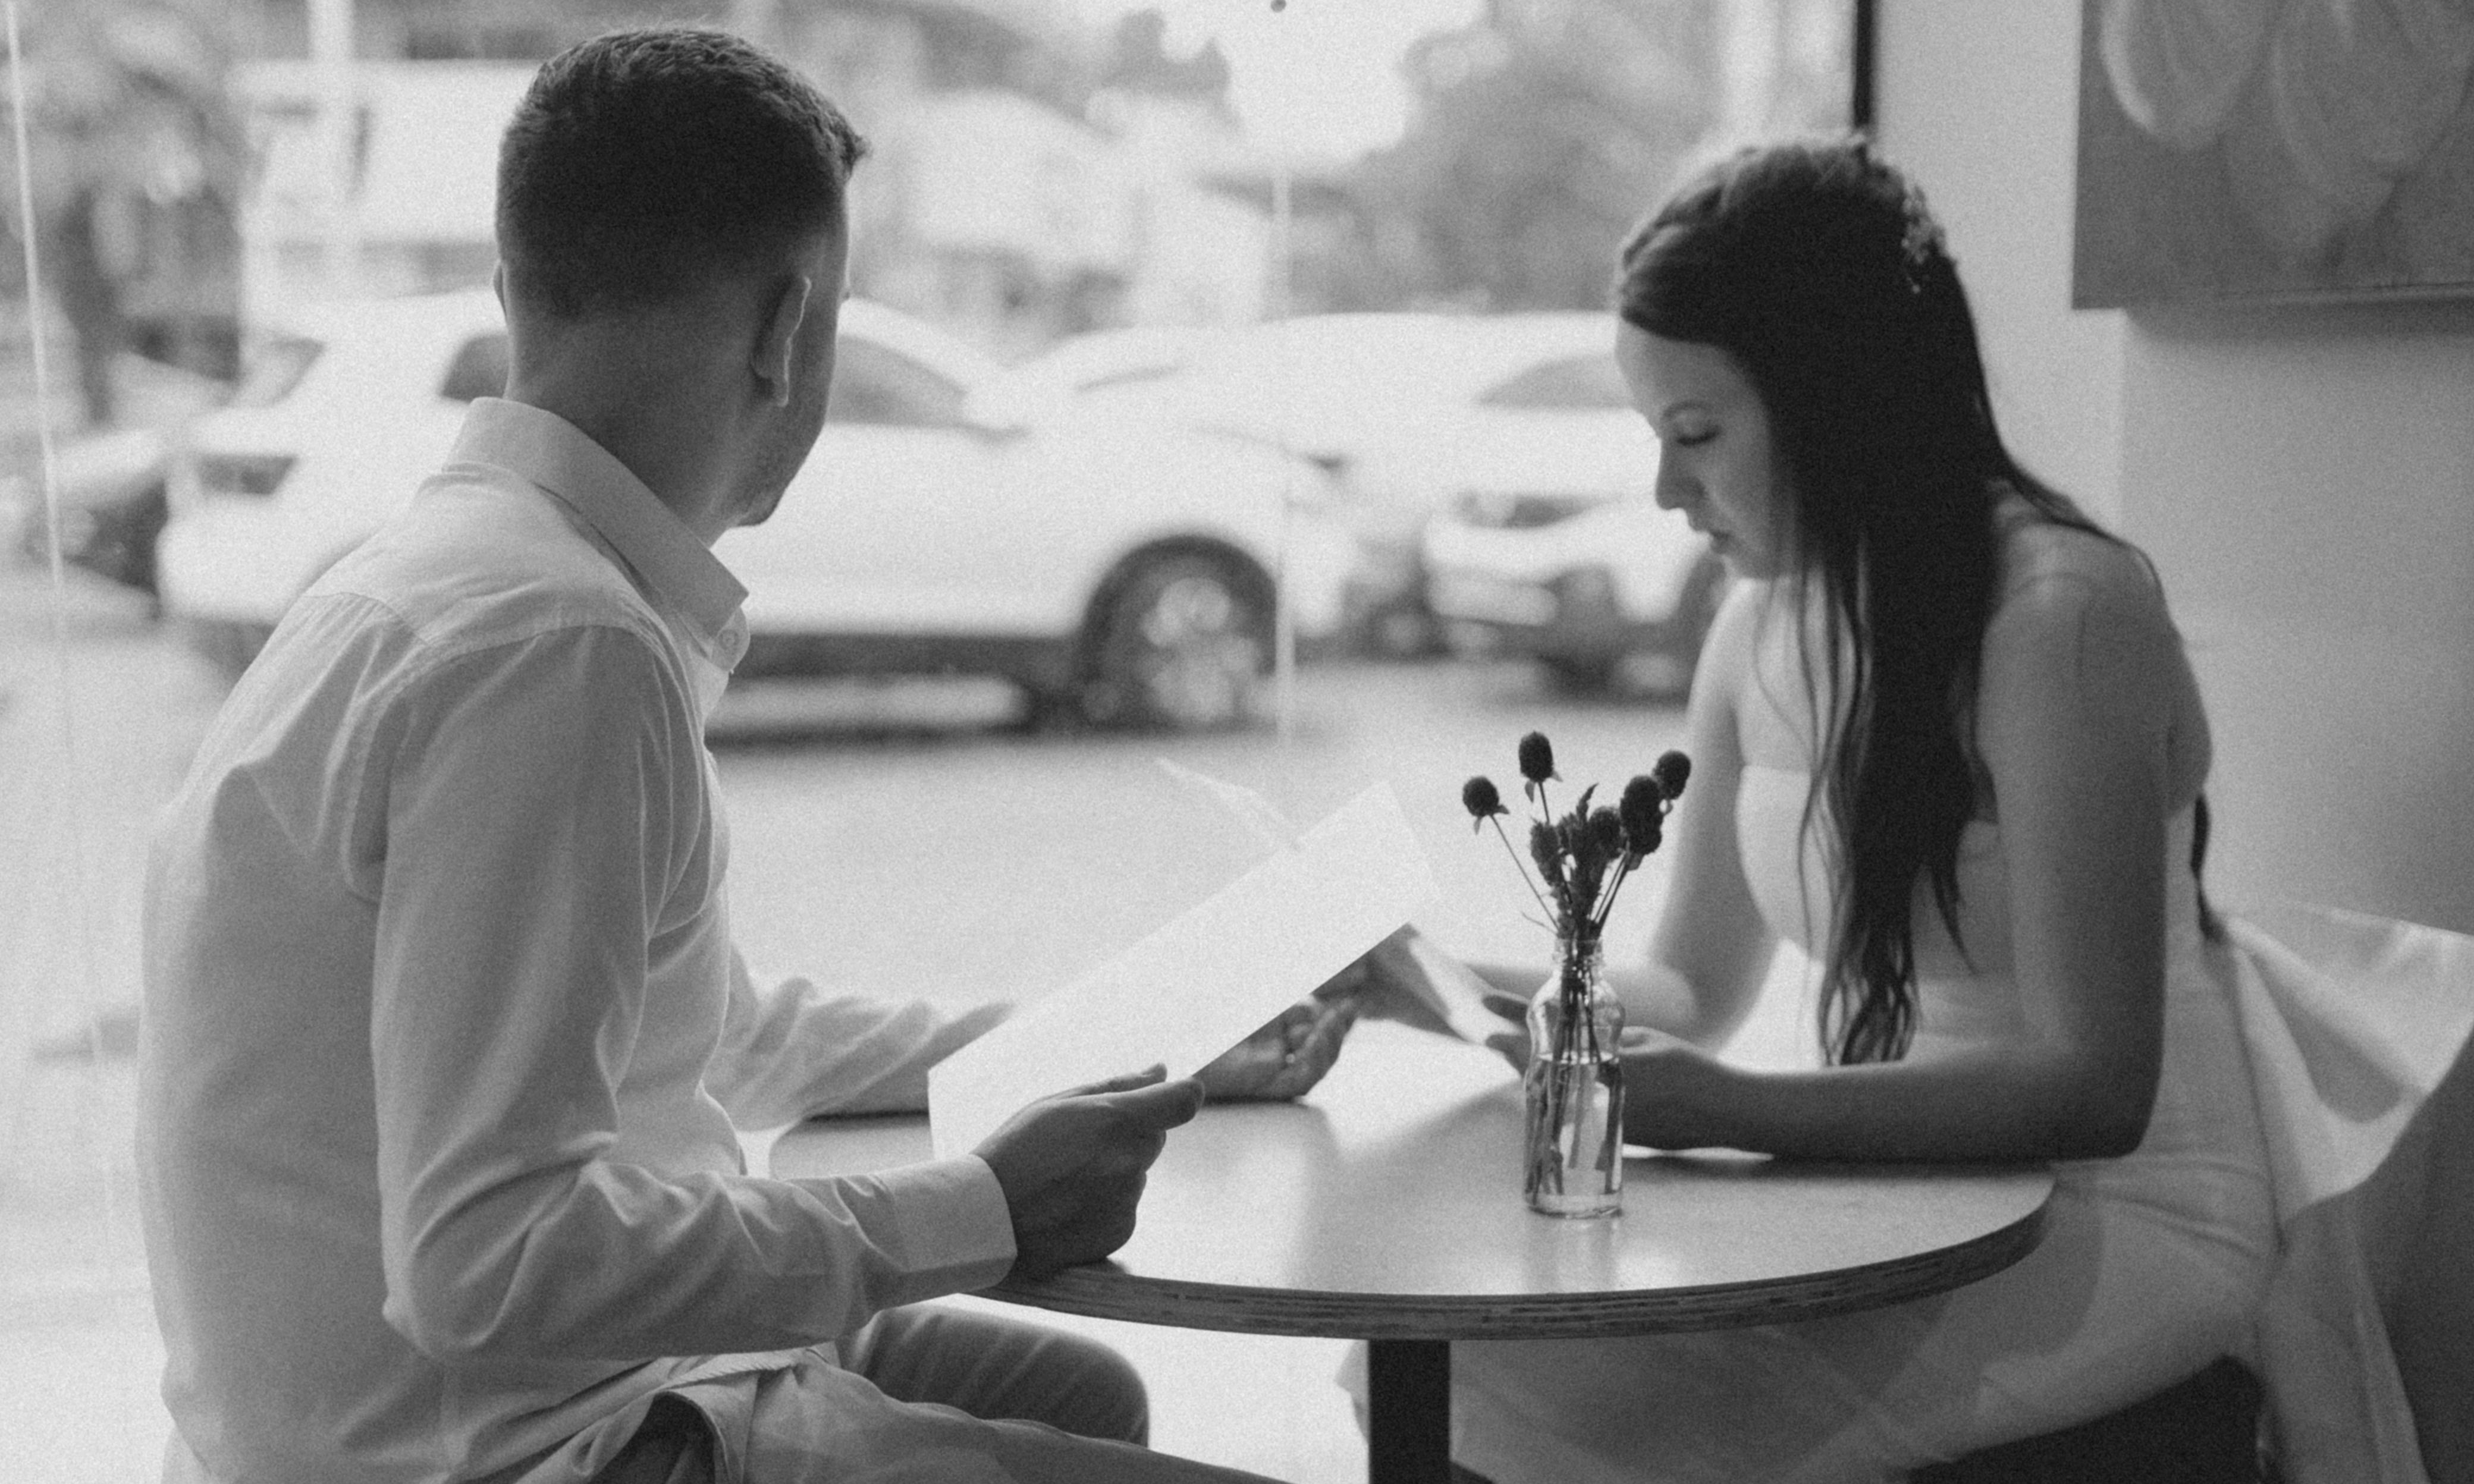 A man and woman meeting in a café | Source: Pexels